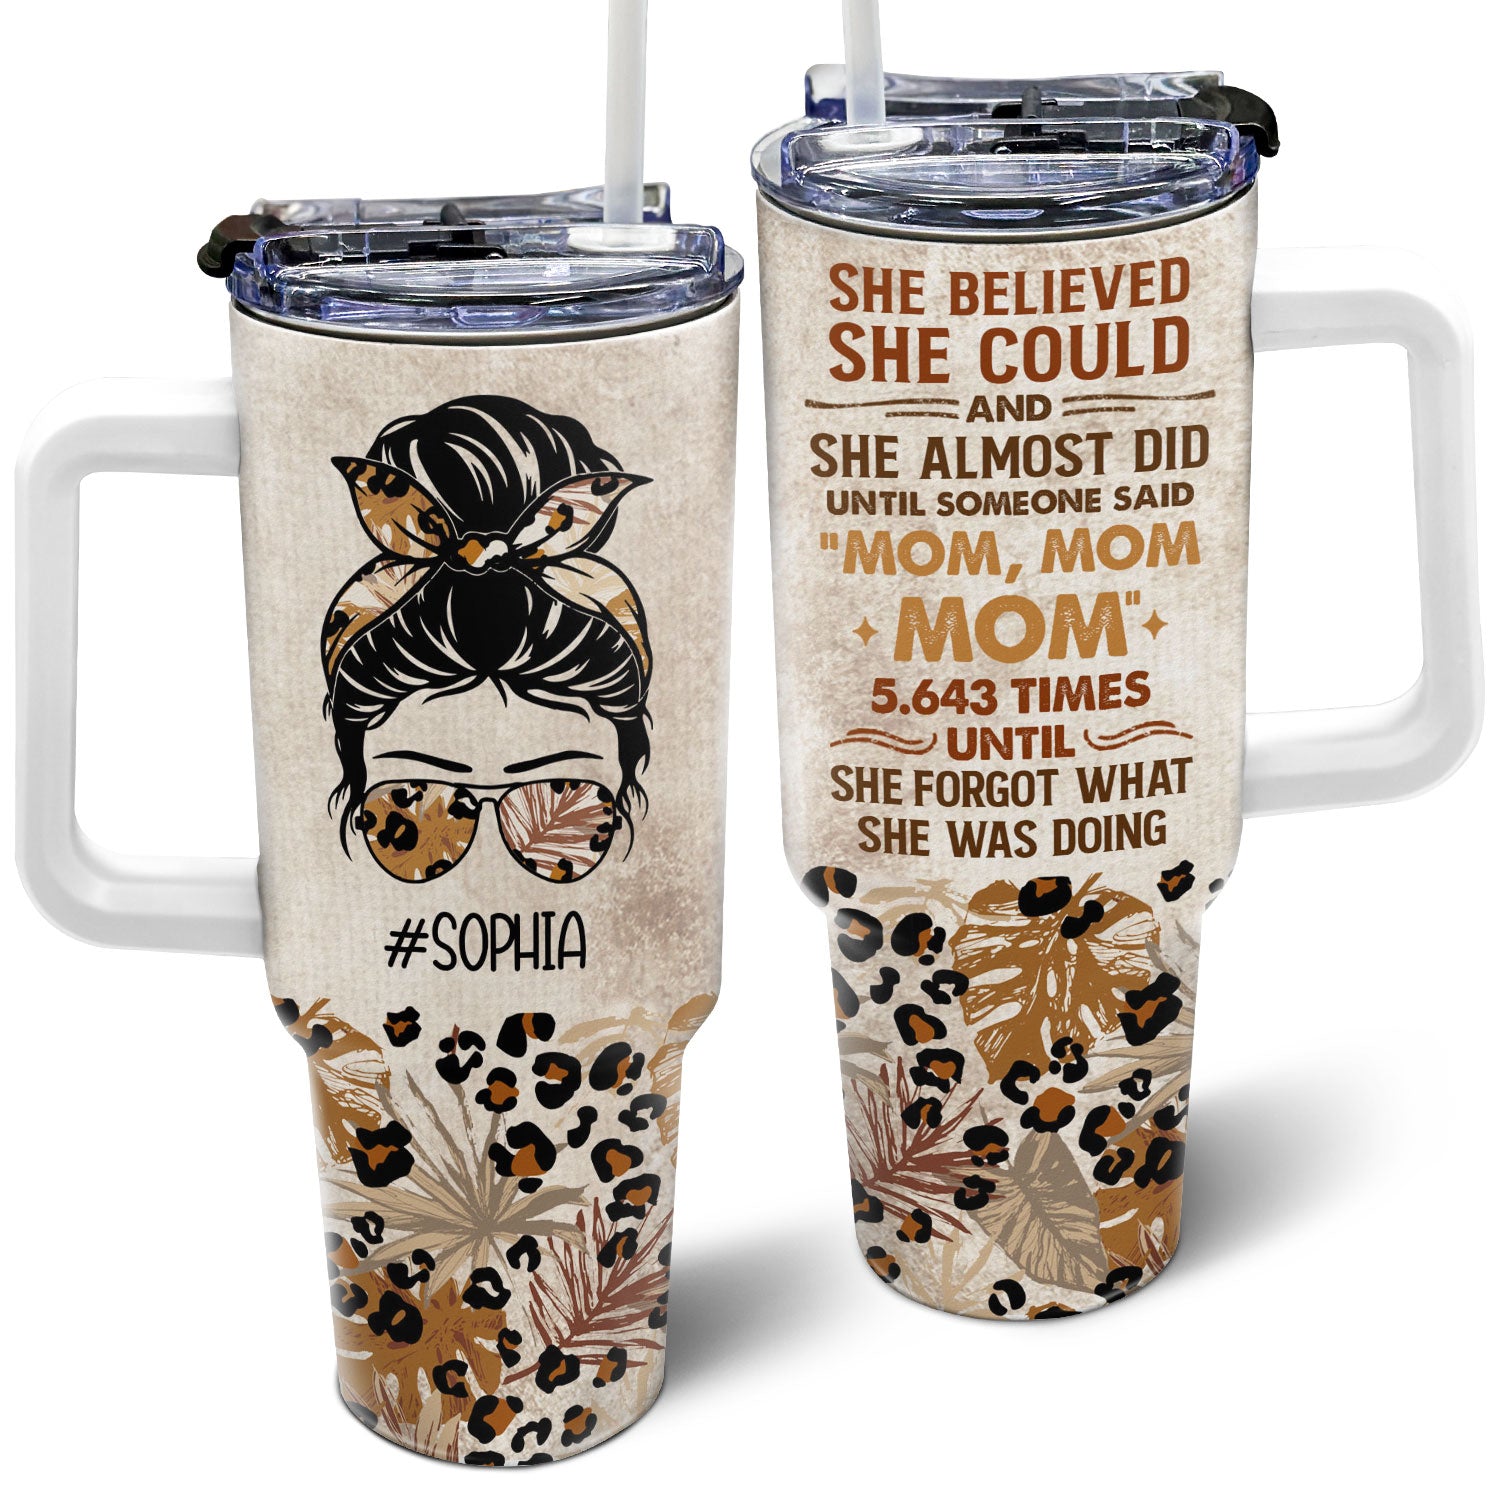 She Believed She Could And She Almost Did - Loving, Birthday Gift For Mom, Mum, Nana - Personalized 40oz Tumbler With Straw